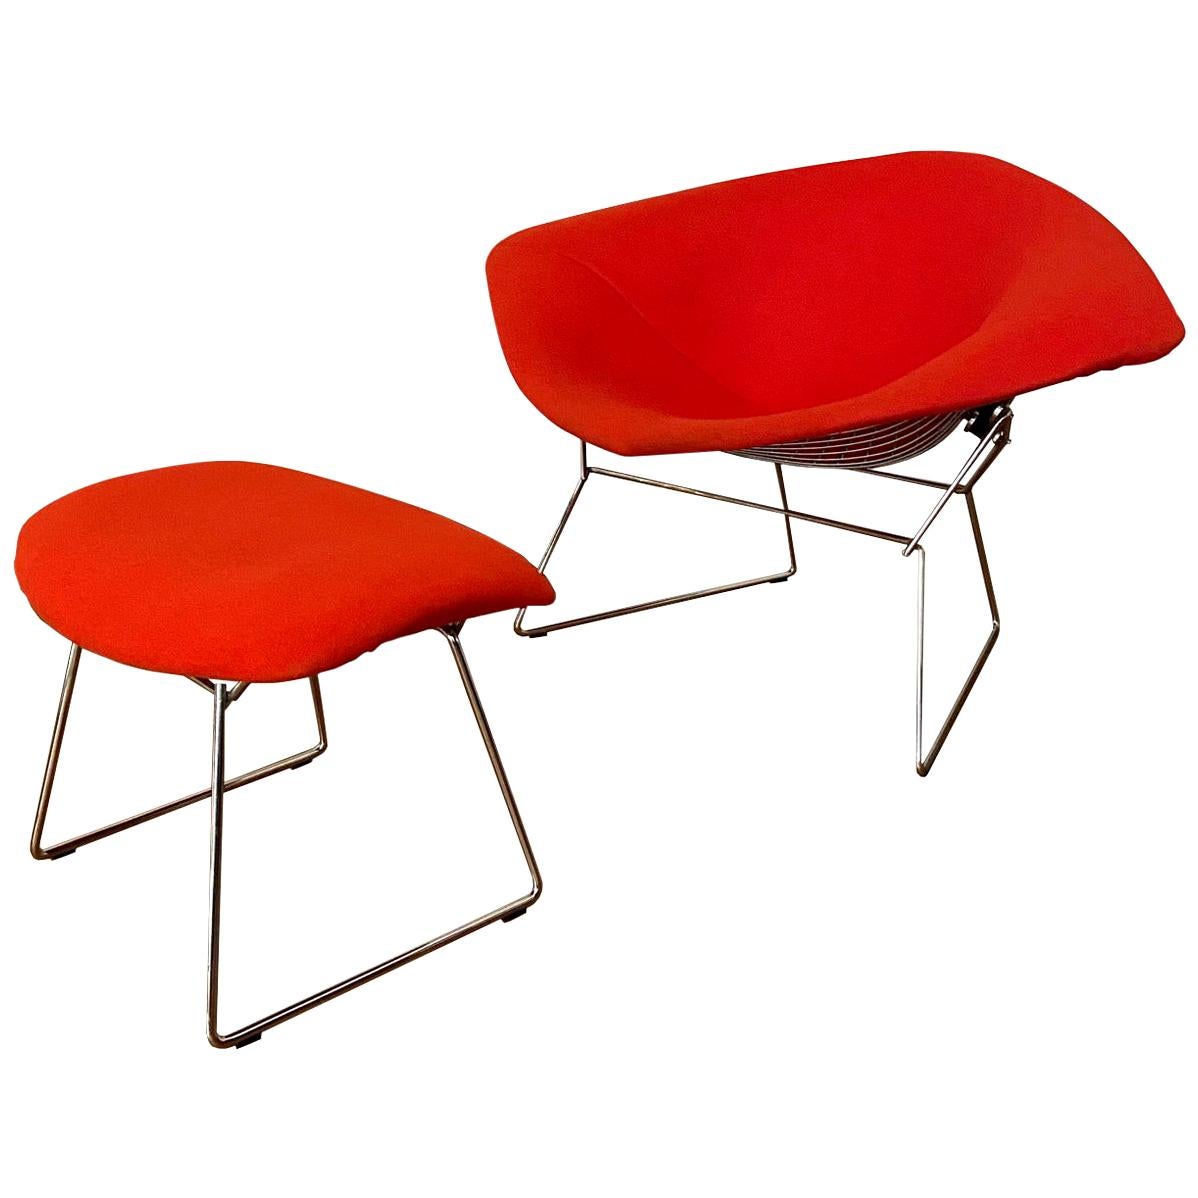 Chromed and Red Harry Bertoia Large Diamond Chair and Ottoman for Knoll